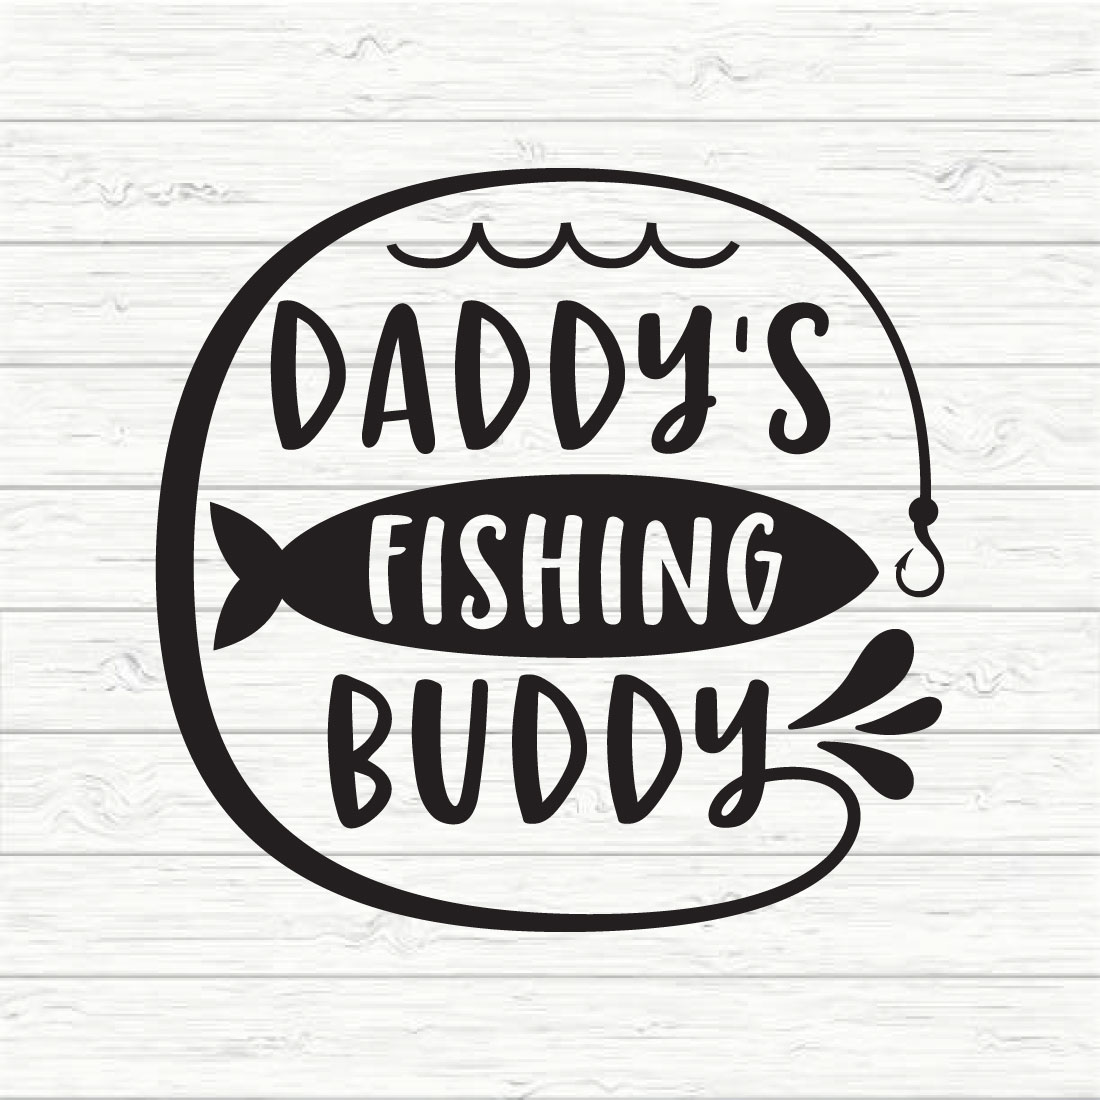 Daddy's Fishing Buddy preview image.